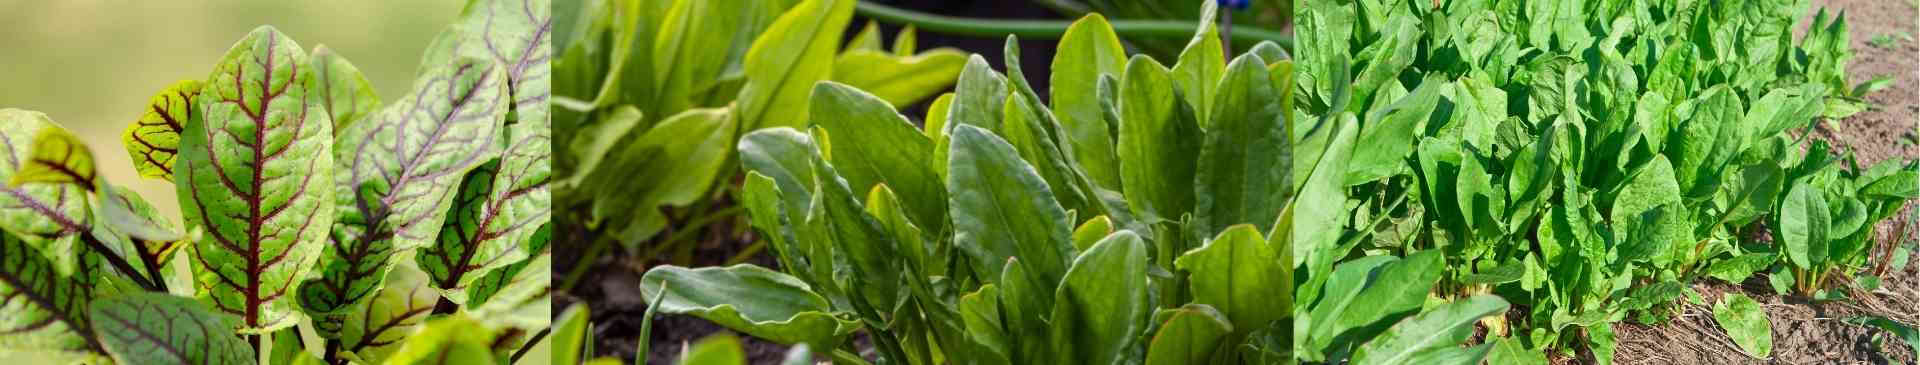 Growing Sorrel: A Tangy Leafy Green for Your Garden